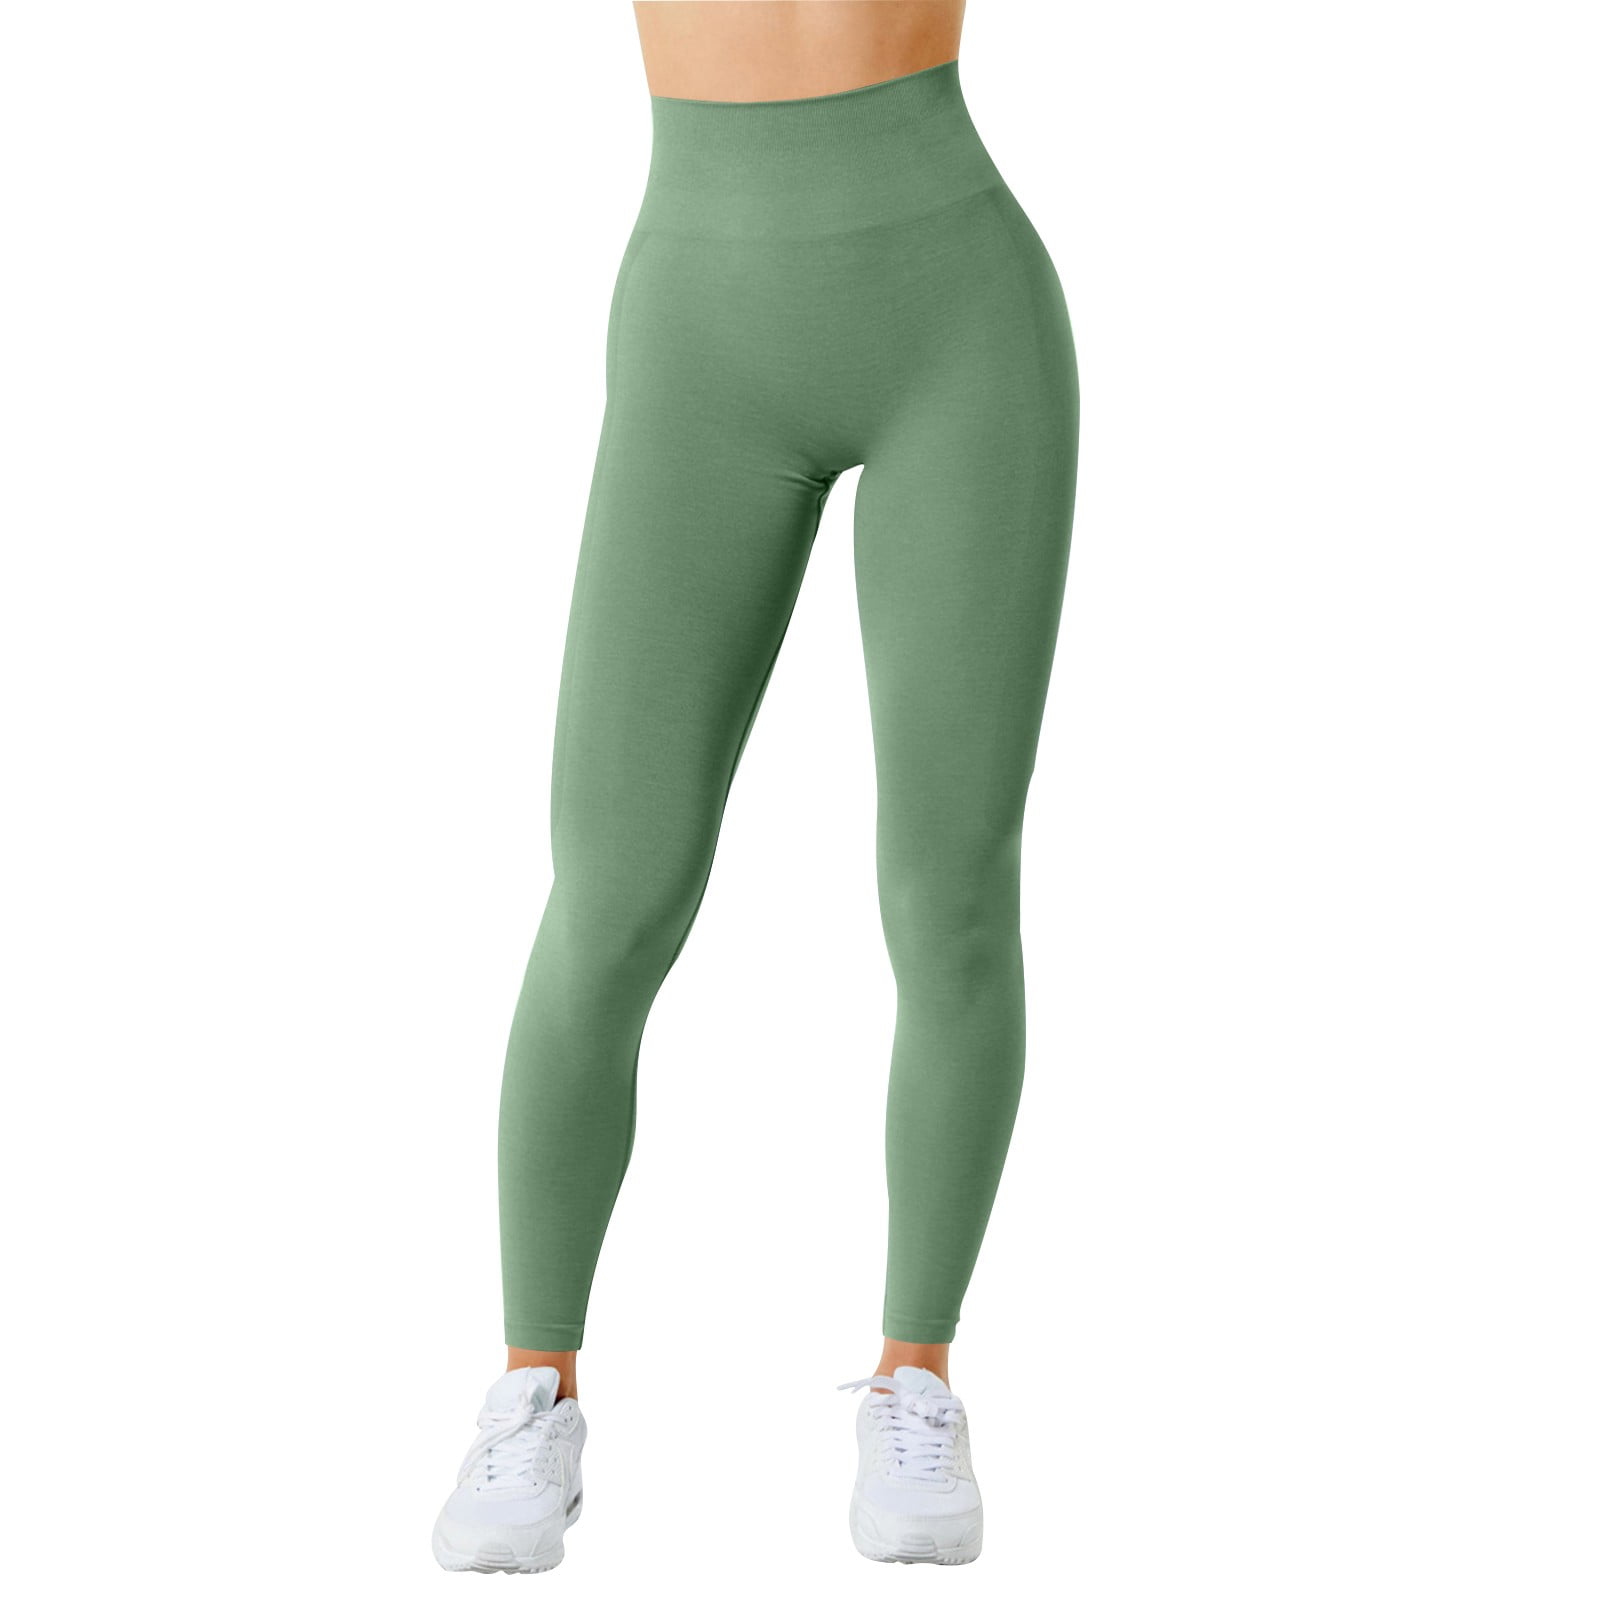 xinqinghao yoga leggings for women women's seamless tight high waisted  elastic quick dry breathable exercise pants yoga pants women yoga pants  camouflage m 